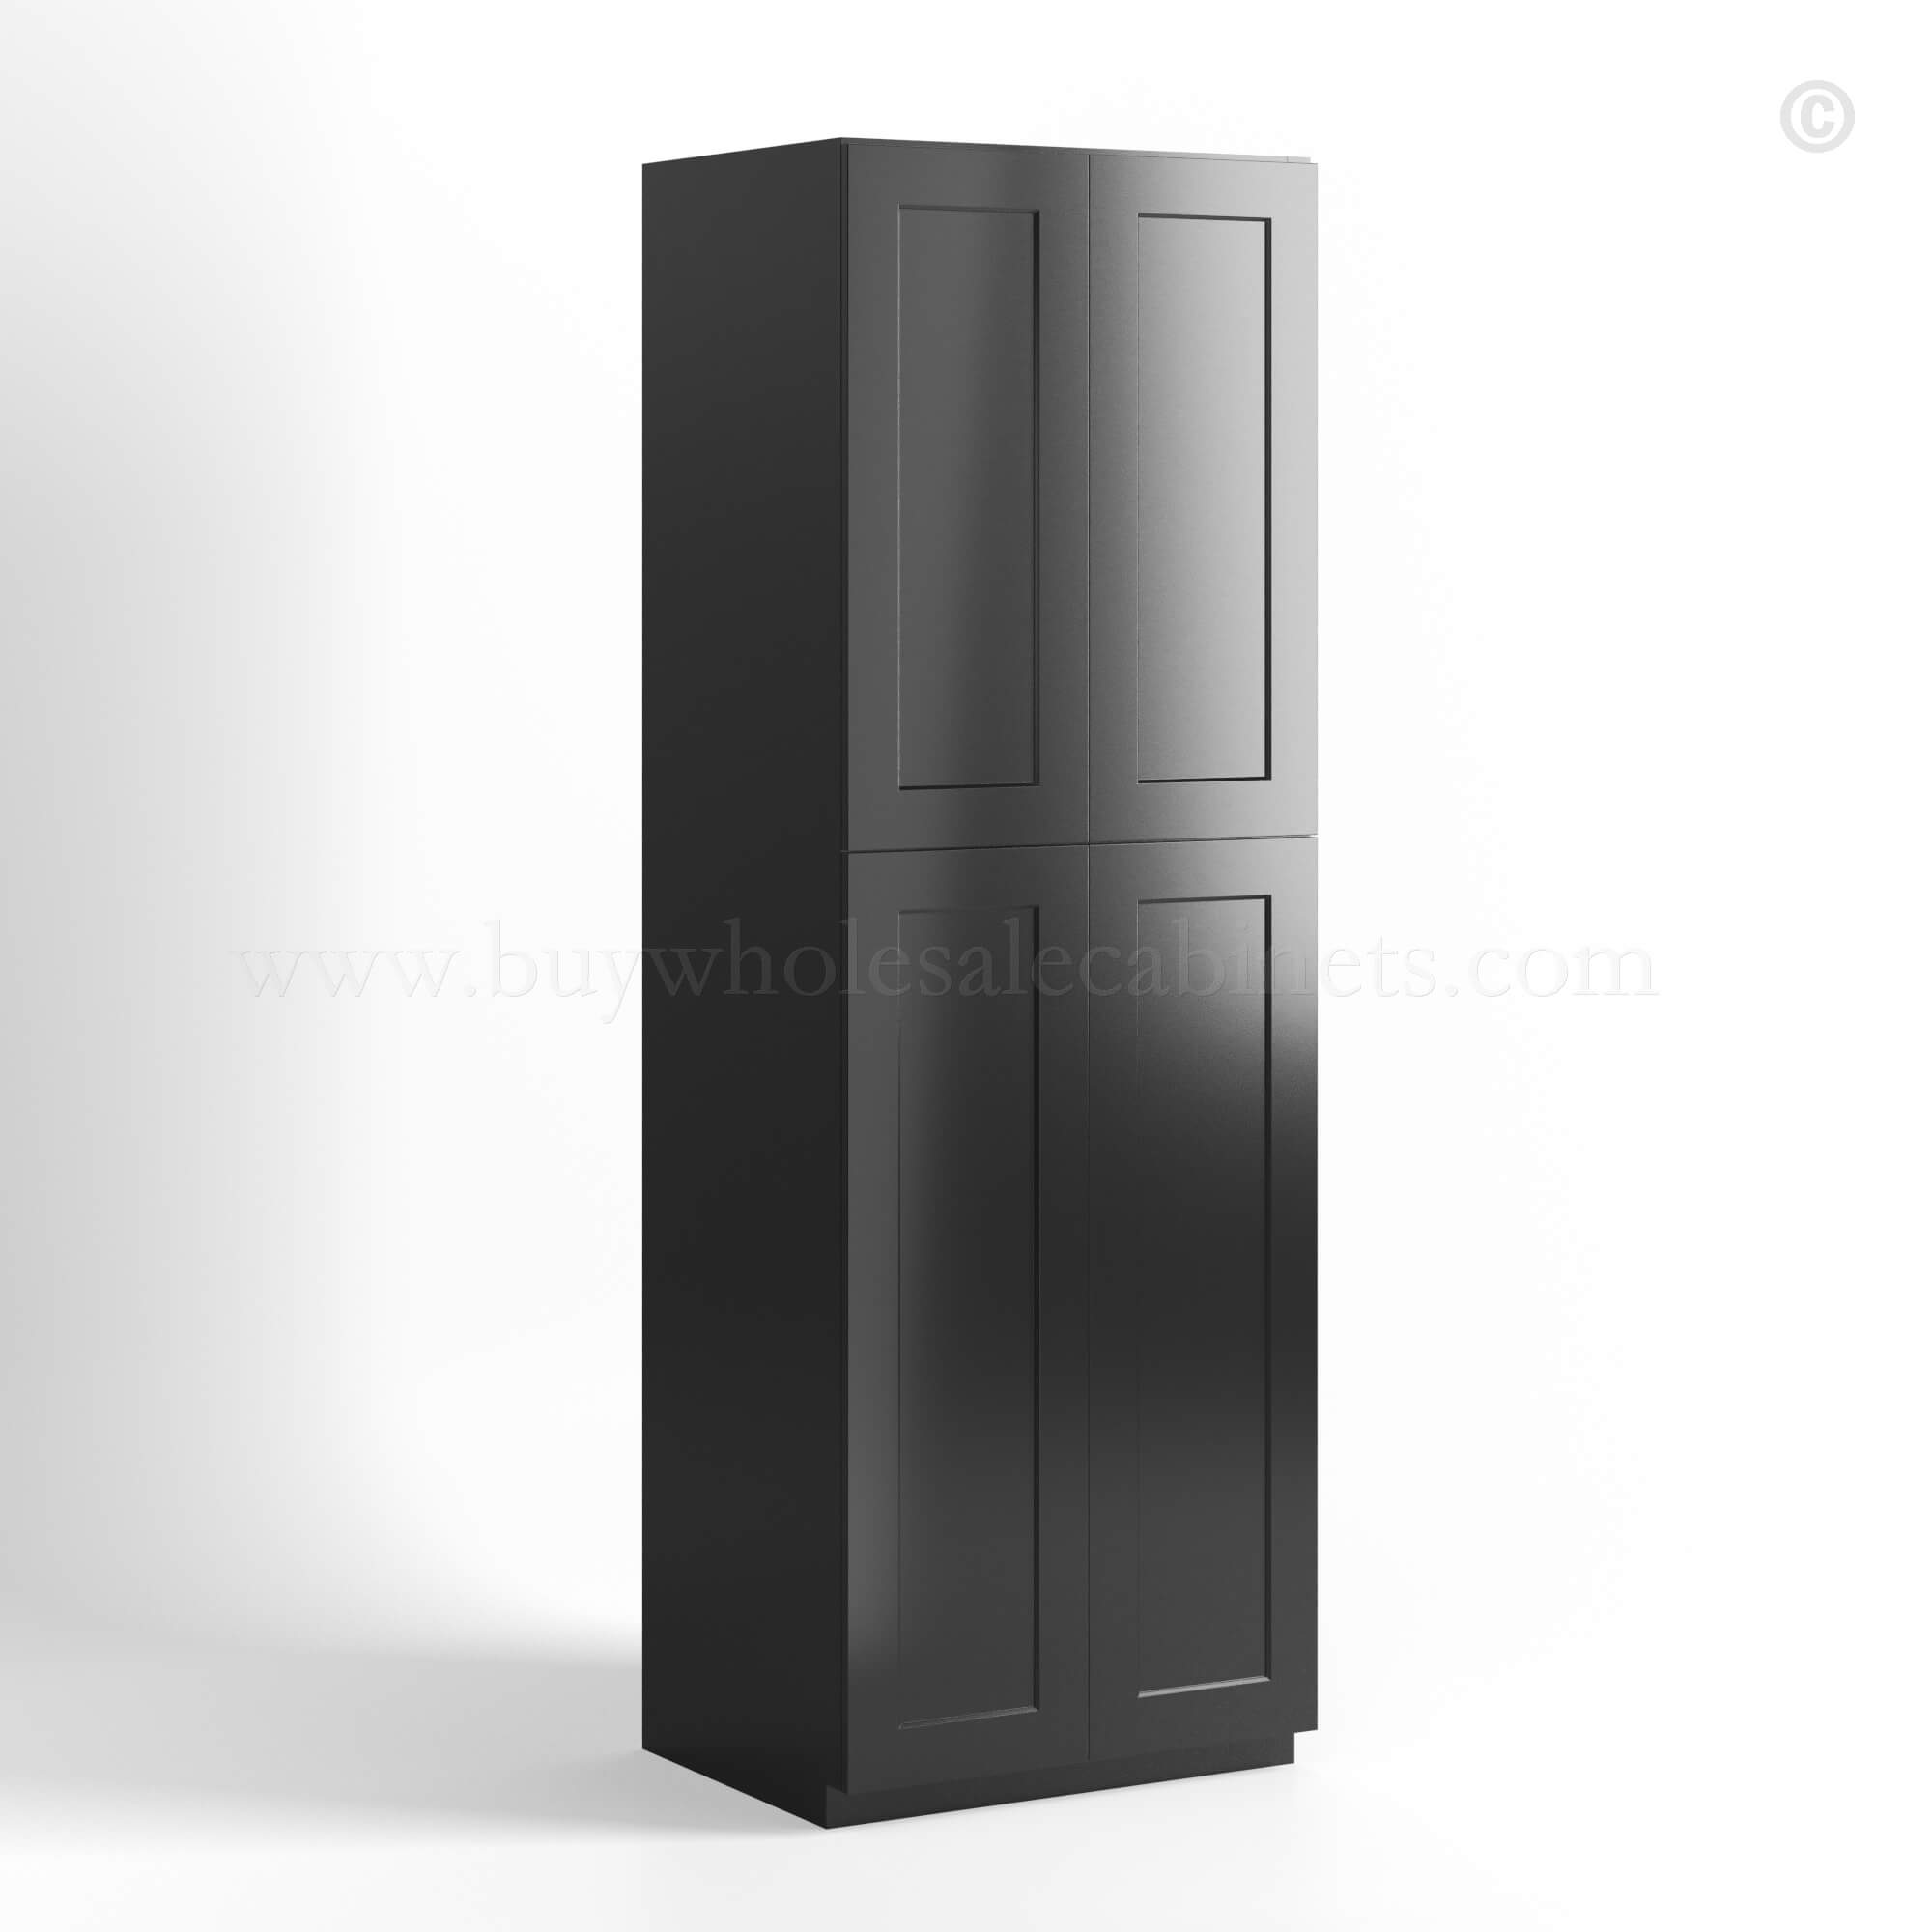 Black Shaker Tall Pantry Cabinet 4 Doors, rta cabinets, wholesale cabinets